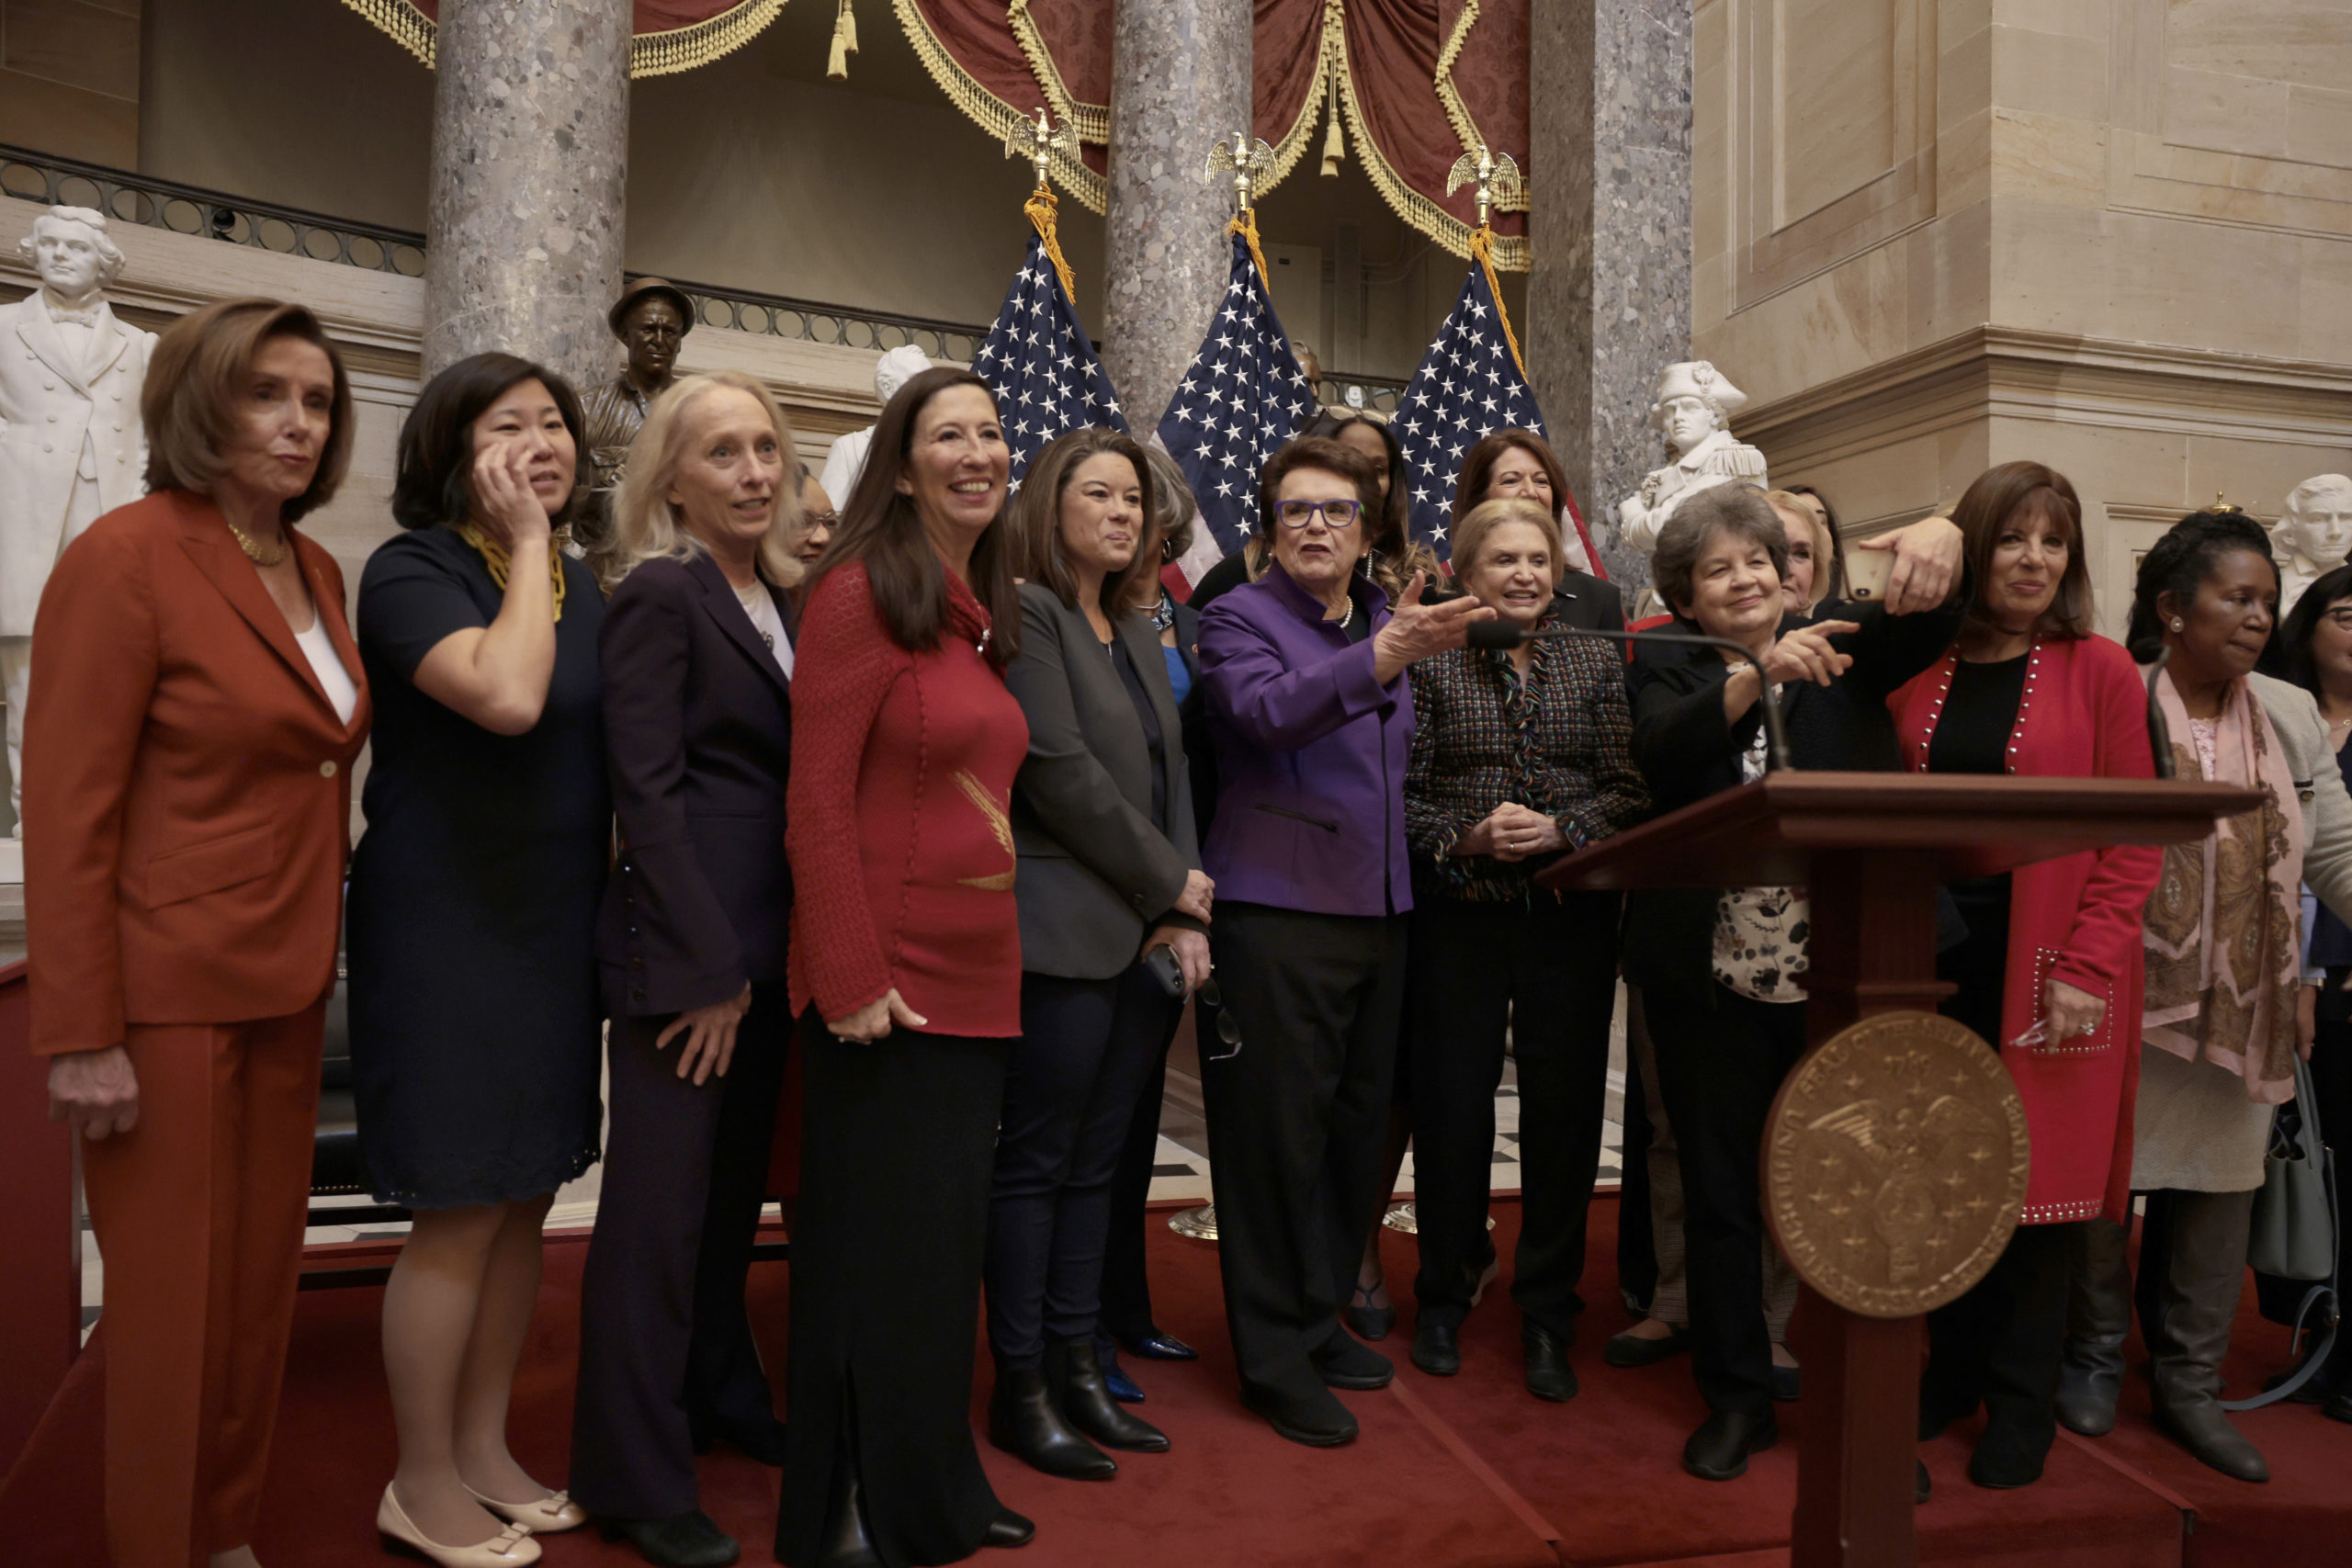 House Speaker Nancy Pelosi (D-CA) (L) and former professional tennis player Billie Jean King (6th L) pose for a photo with members of Congress at a Women's History Month event at the U.S. Capitol Building on March 09, 2022 in Washington, DC. Speaker Pelosi held the event to celebrate women athletes, including King and to honor the 50th Anniversary of the passage of Title IX. (Photo by Anna Moneymaker/Getty Images)